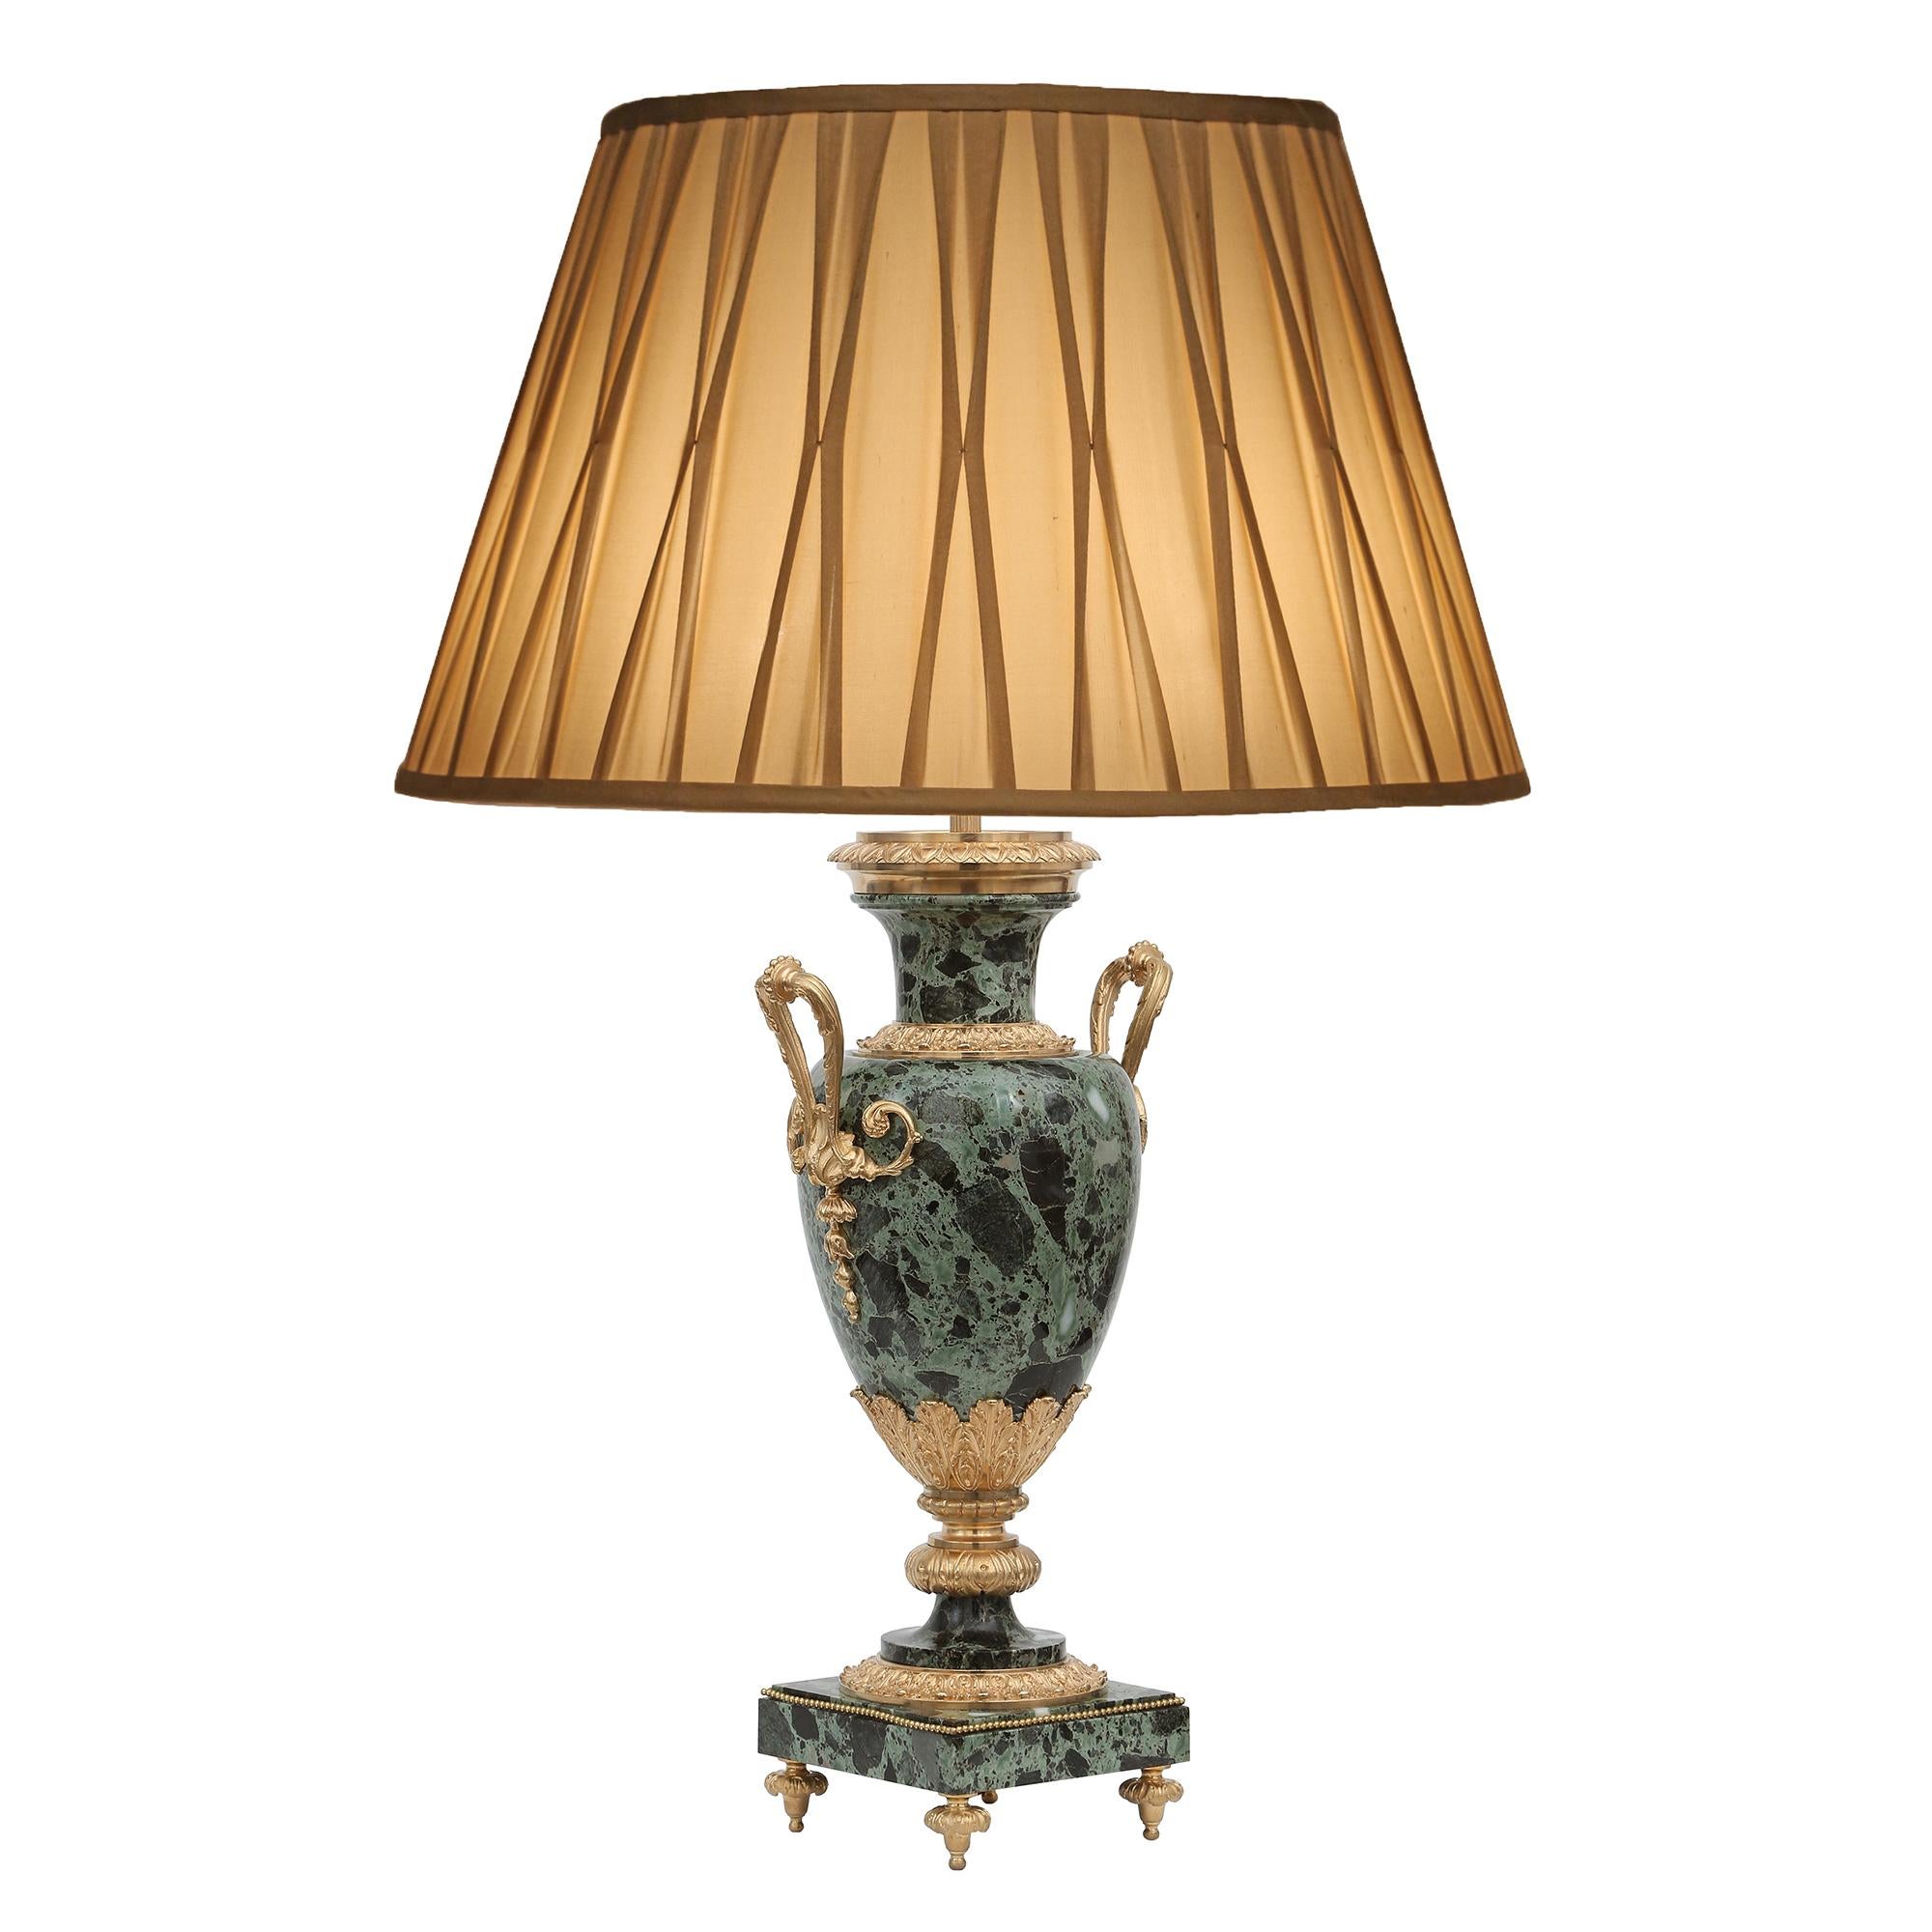 An elegant and high quality pair of French 19th century Louis XVI st. marble and ormolu mounted lamps. Each lamp is raised by fine floral topie shaped ormolu feet. The square Greek Antique Green marble base is decorated with a beaded ormolu band